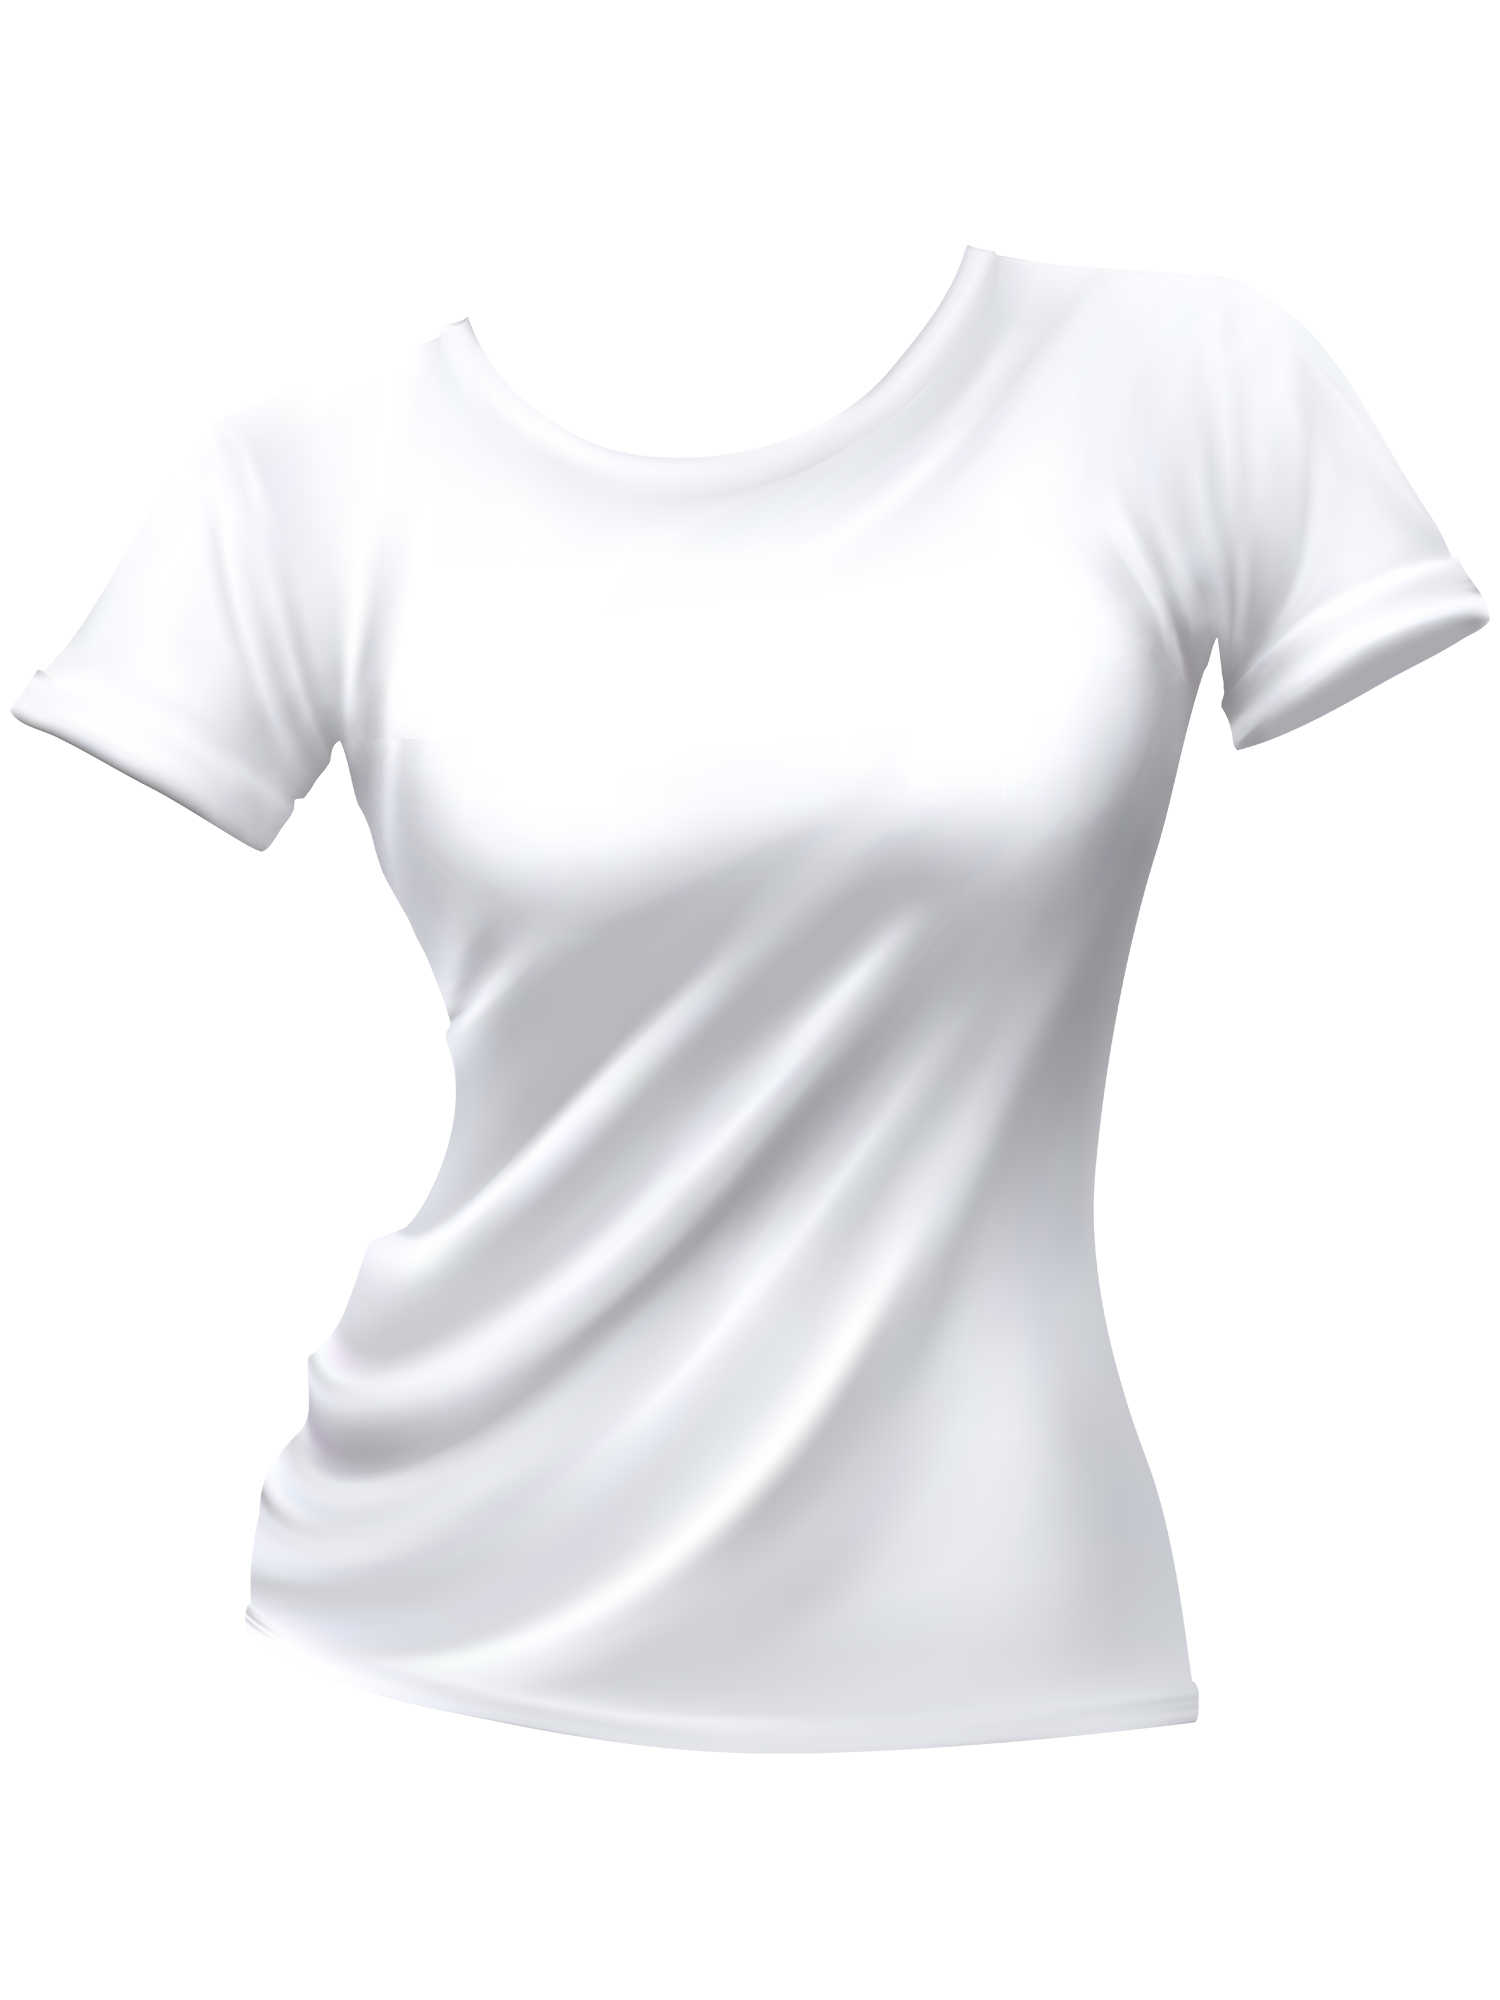 T-shirt Mockup Images Free Photos, PNG Stickers, Wallpapers